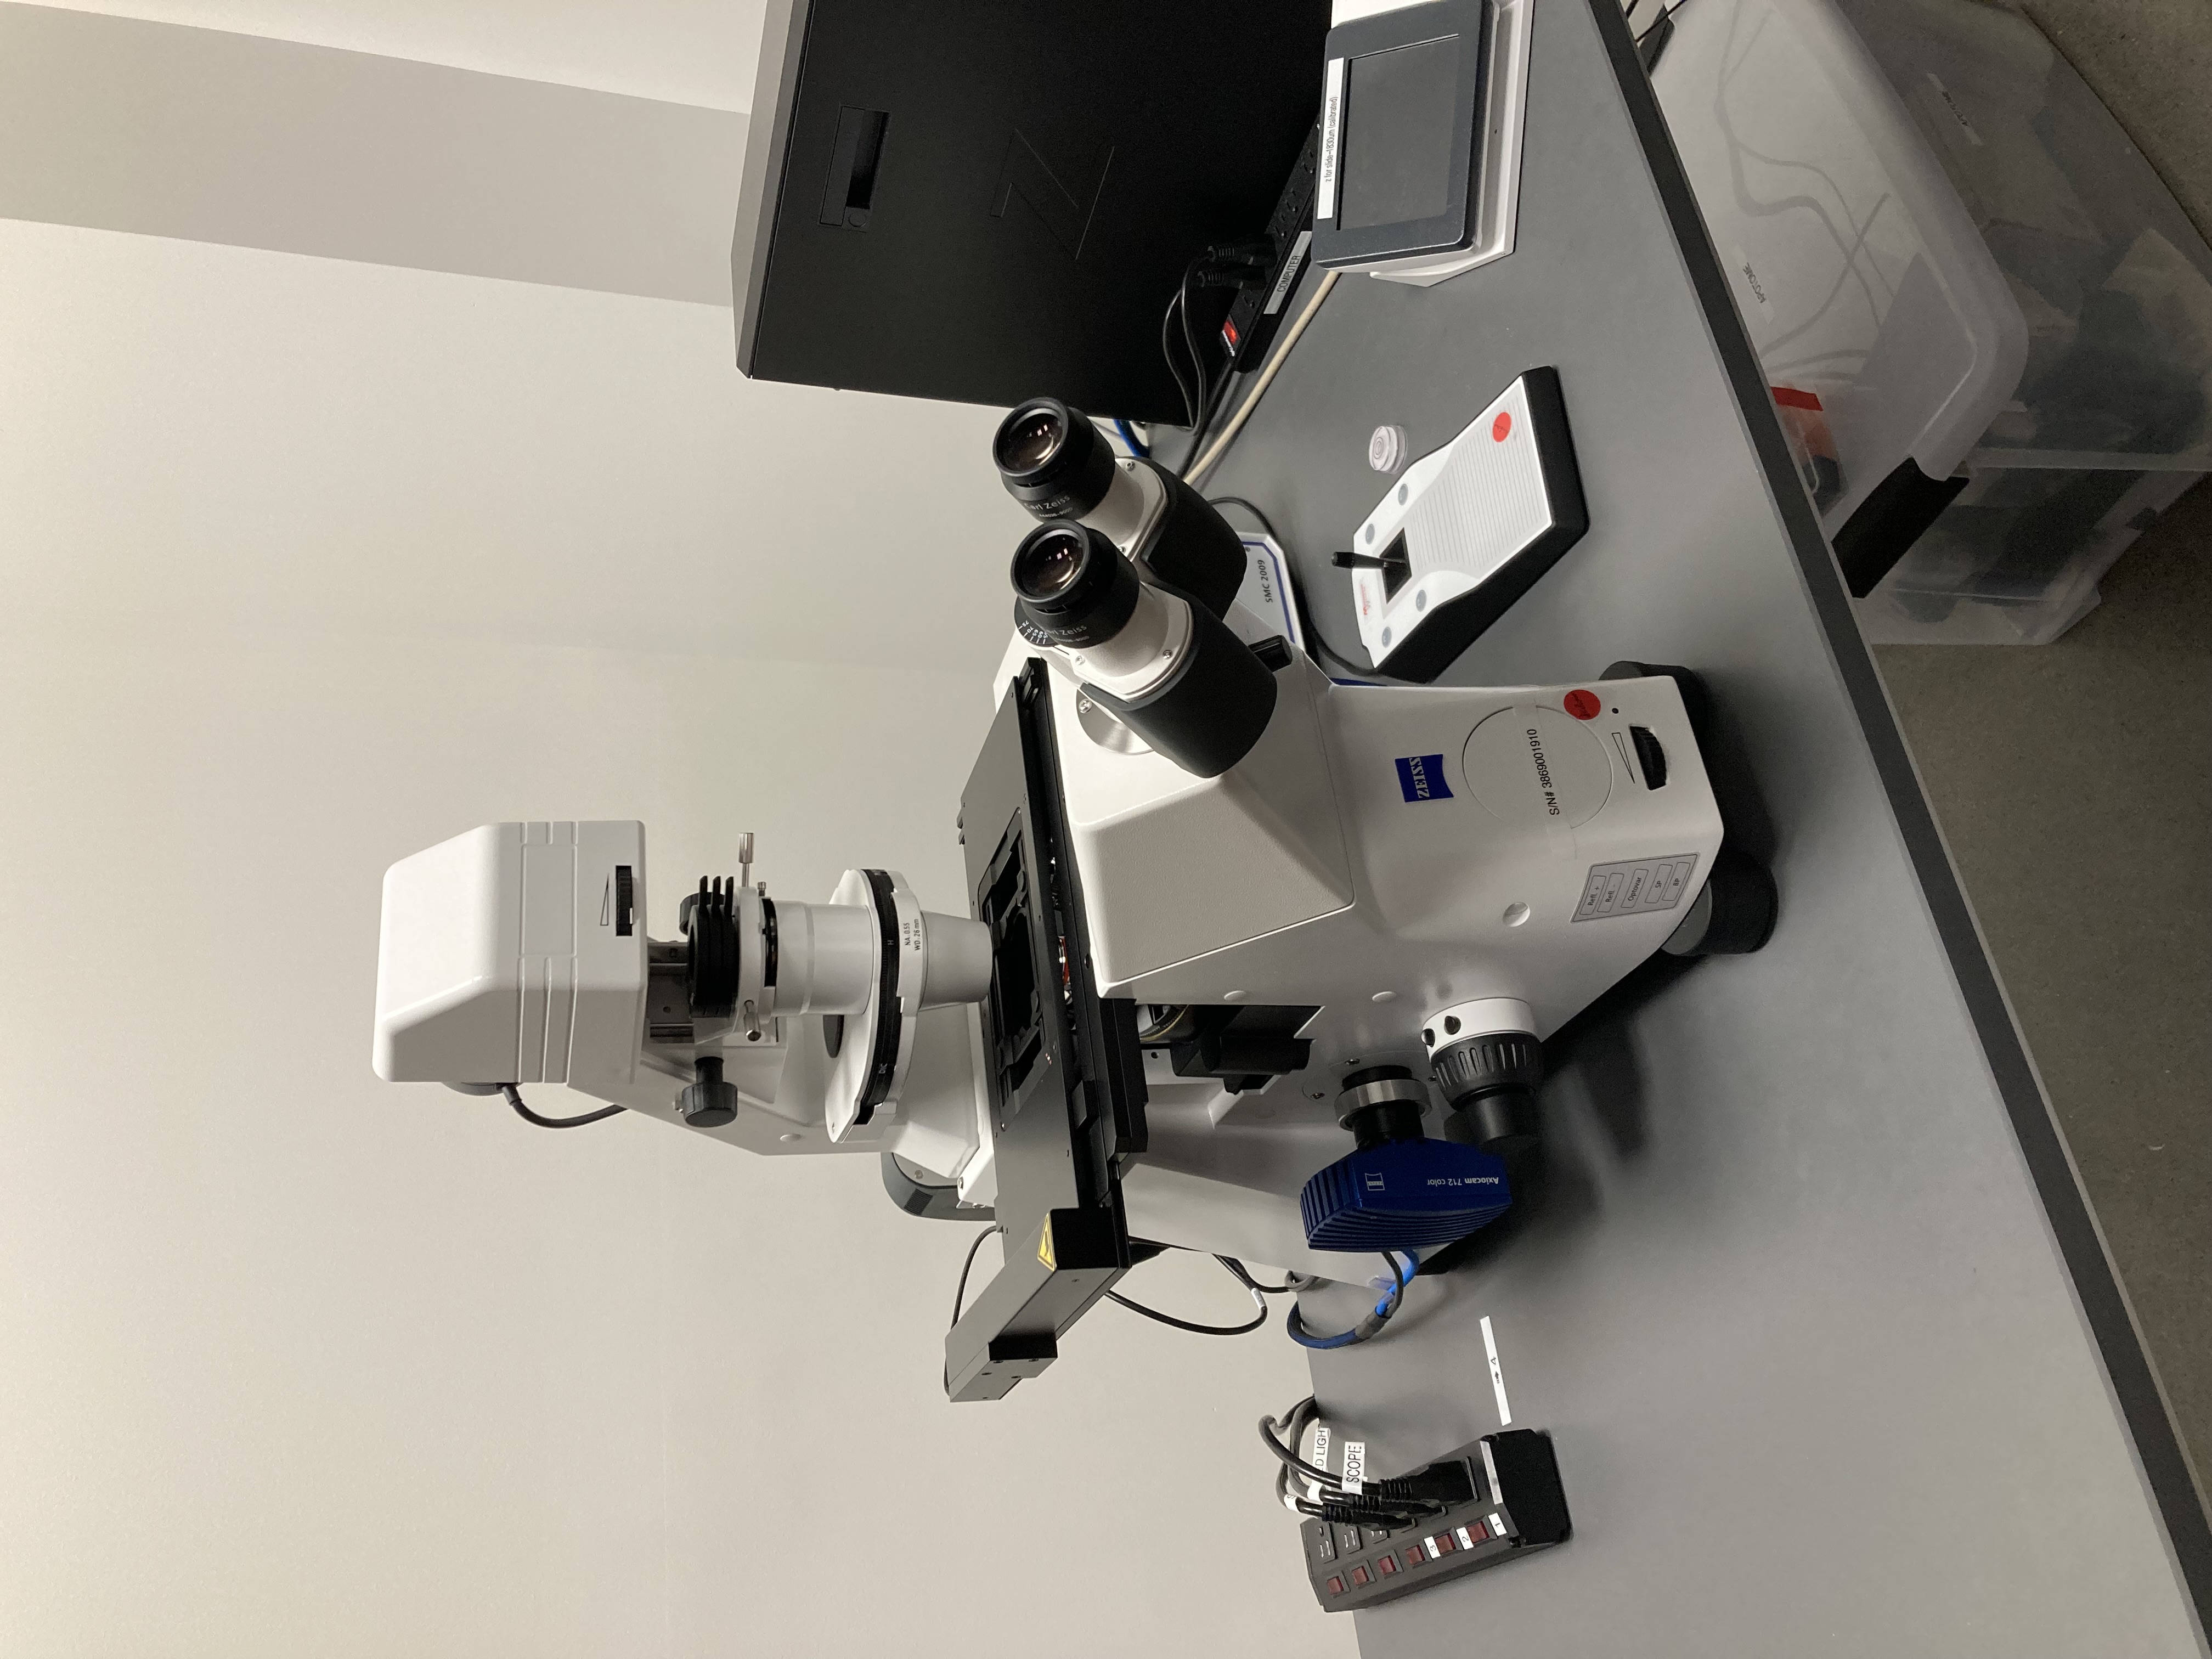 Image of a Zeiss Apotome 3 inverted microscope